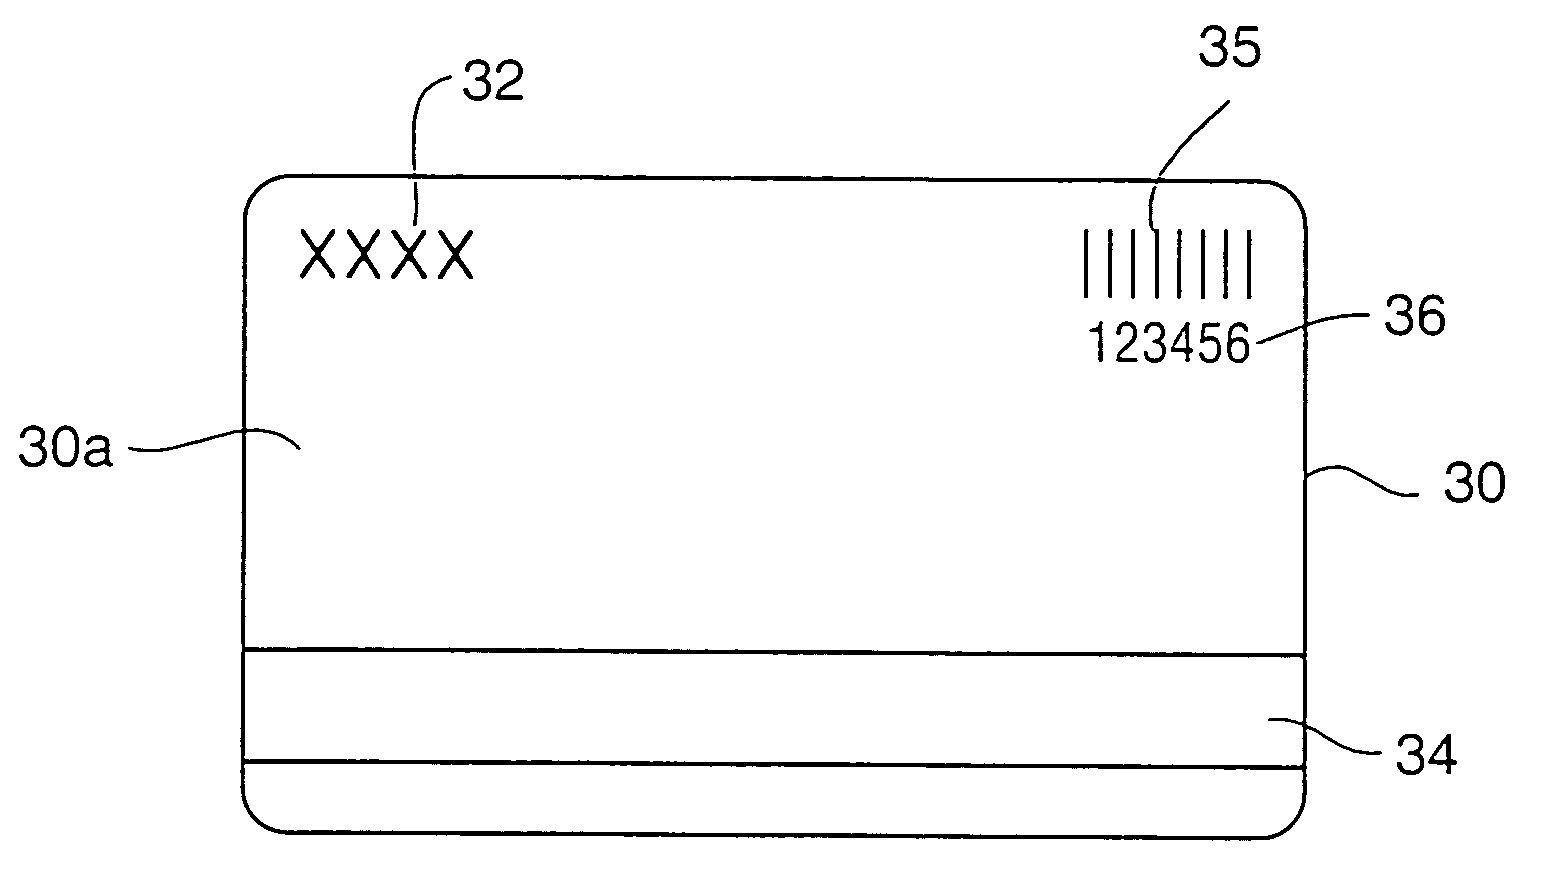 Printed item having an image with a high durability and/or resolution